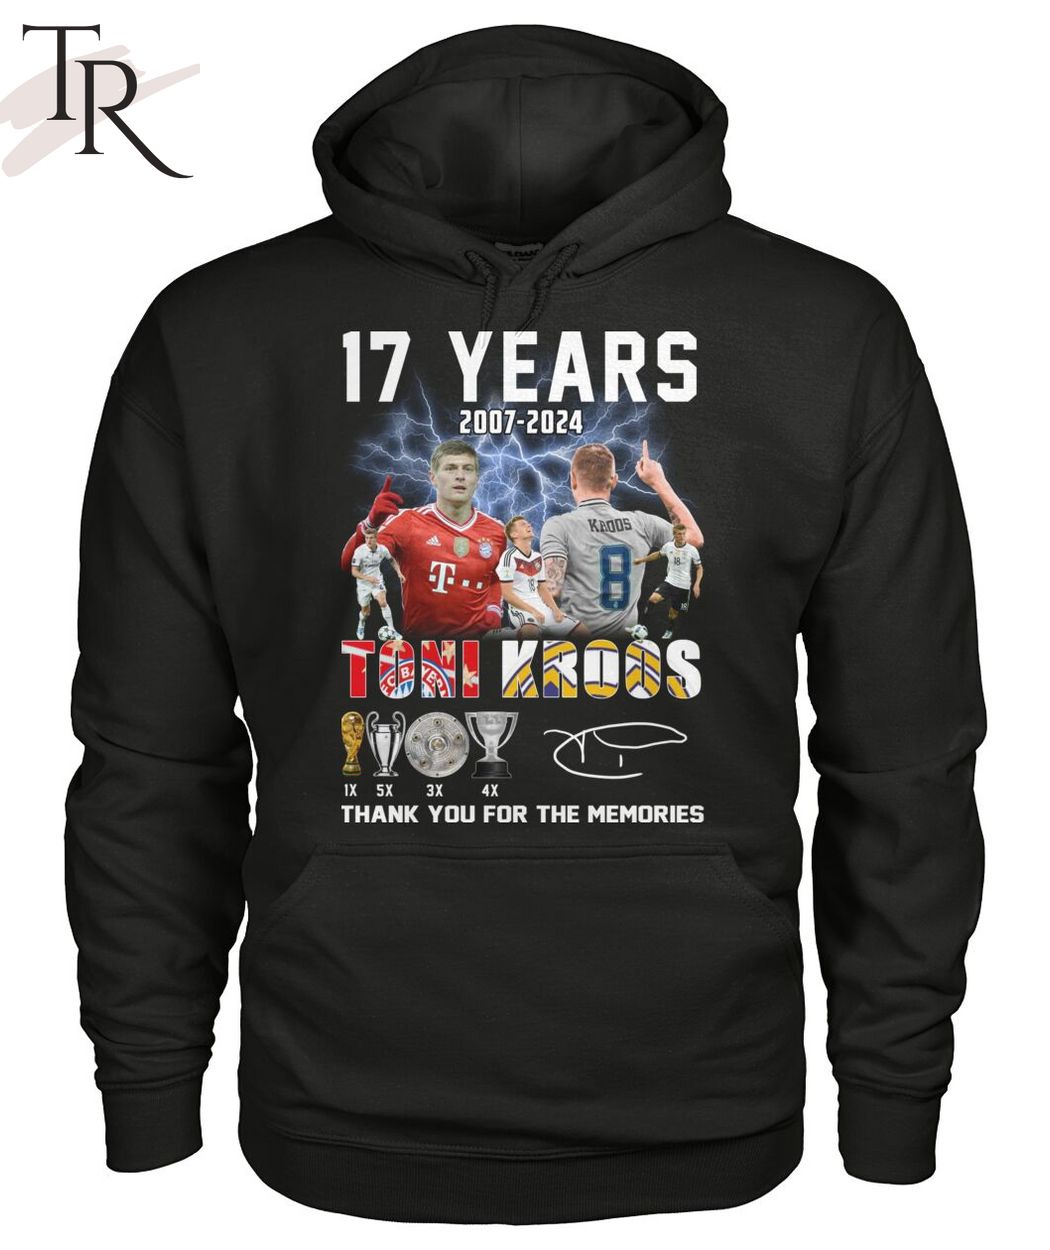 17 Years 2007-2024 Toni Kroos Thank You For The Memories T-Shirt